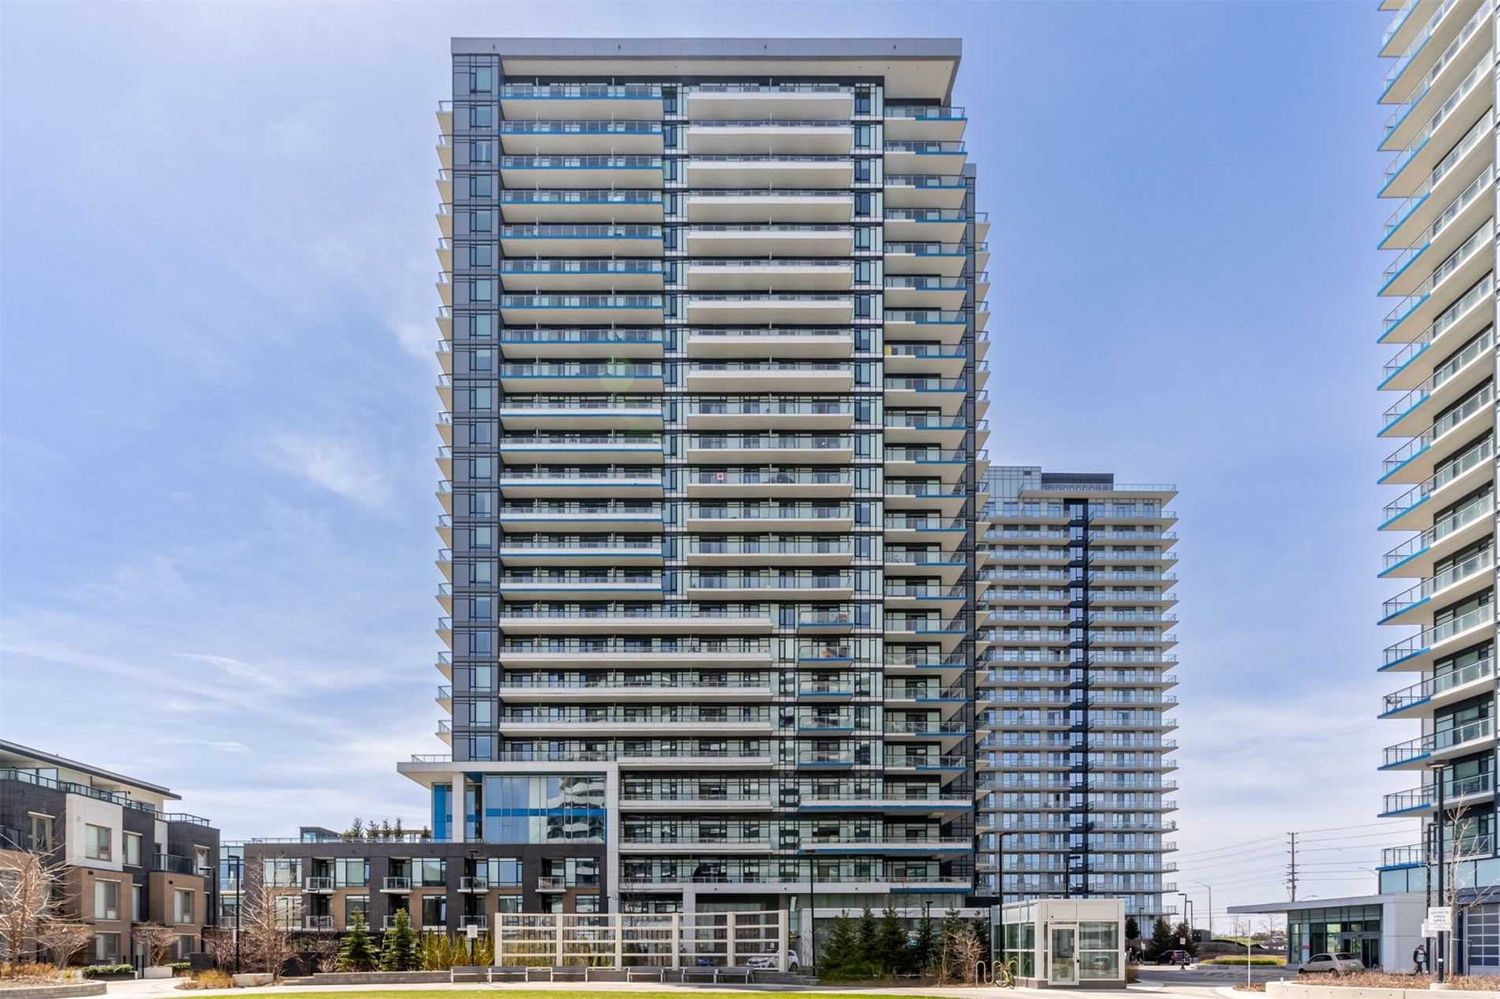 2560 Eglinton Avenue W. The West Tower Condos is located in  Mississauga, Toronto - image #1 of 2